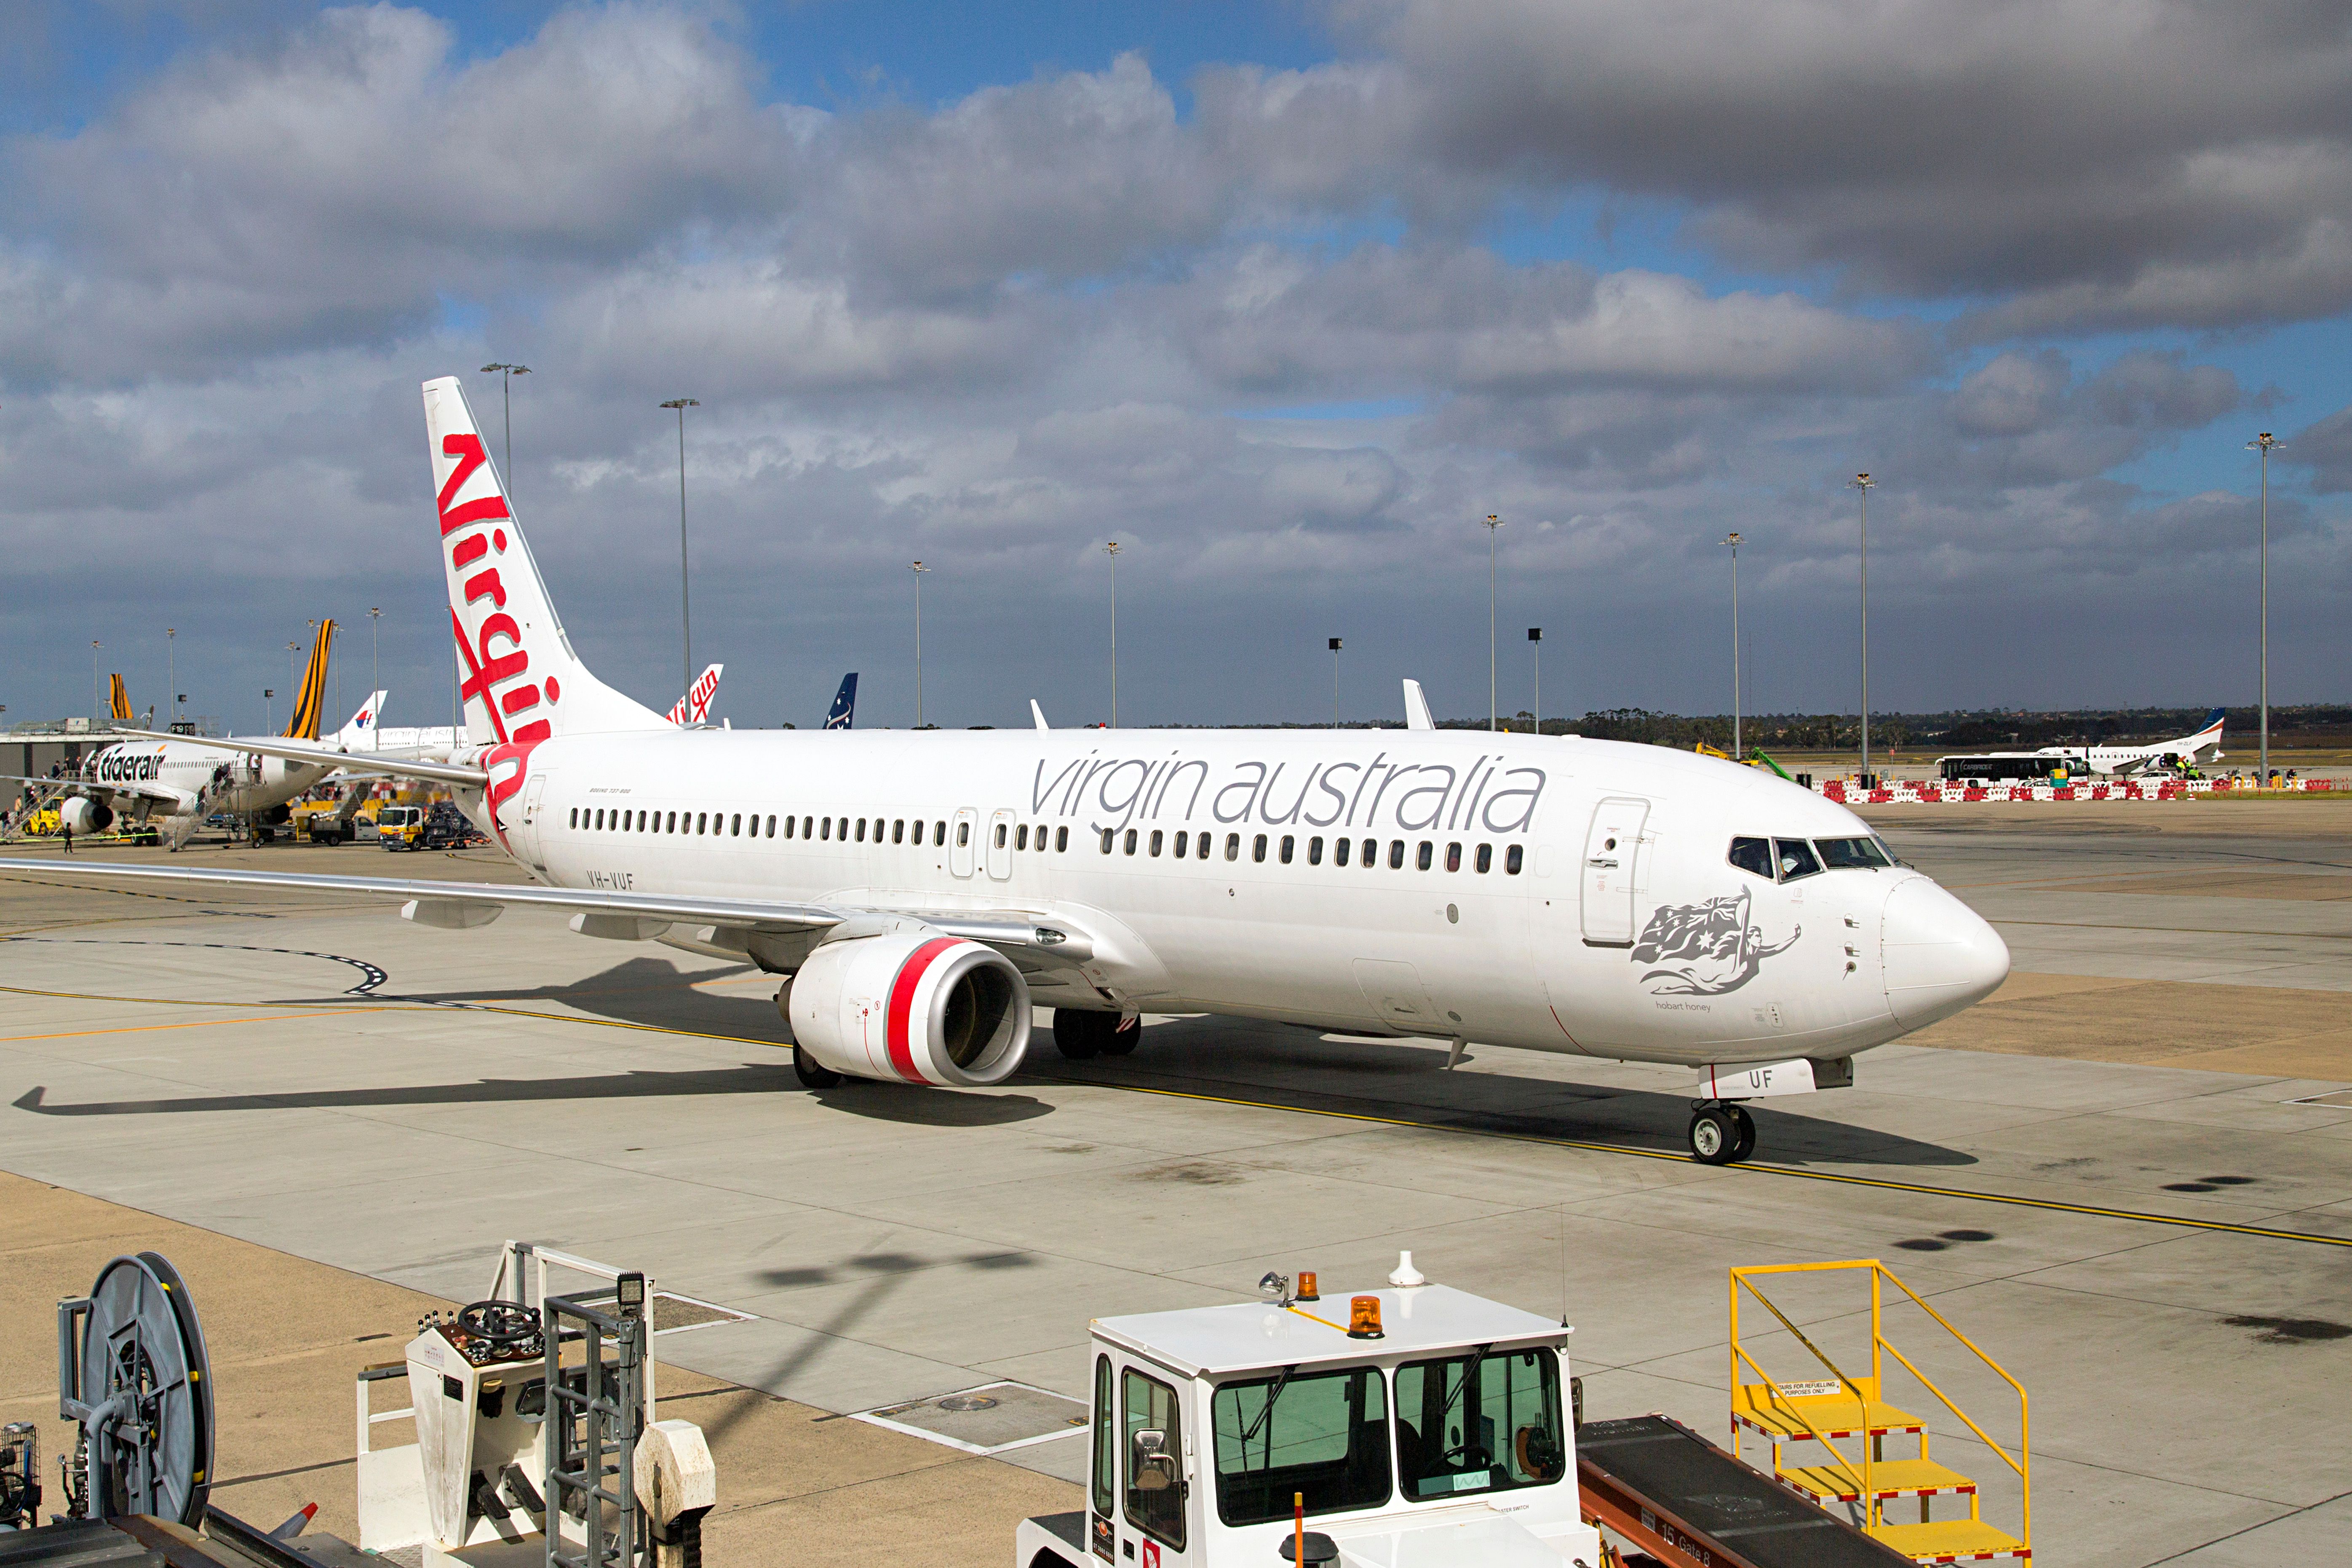 737-800 Melbourne, Australia: March 26, 2018: Virgin Australia airplane on the runway at Tullamarine Airport in Melbourne. Virgin Australia Airlines is Australia's second-largest airline after Qantas.